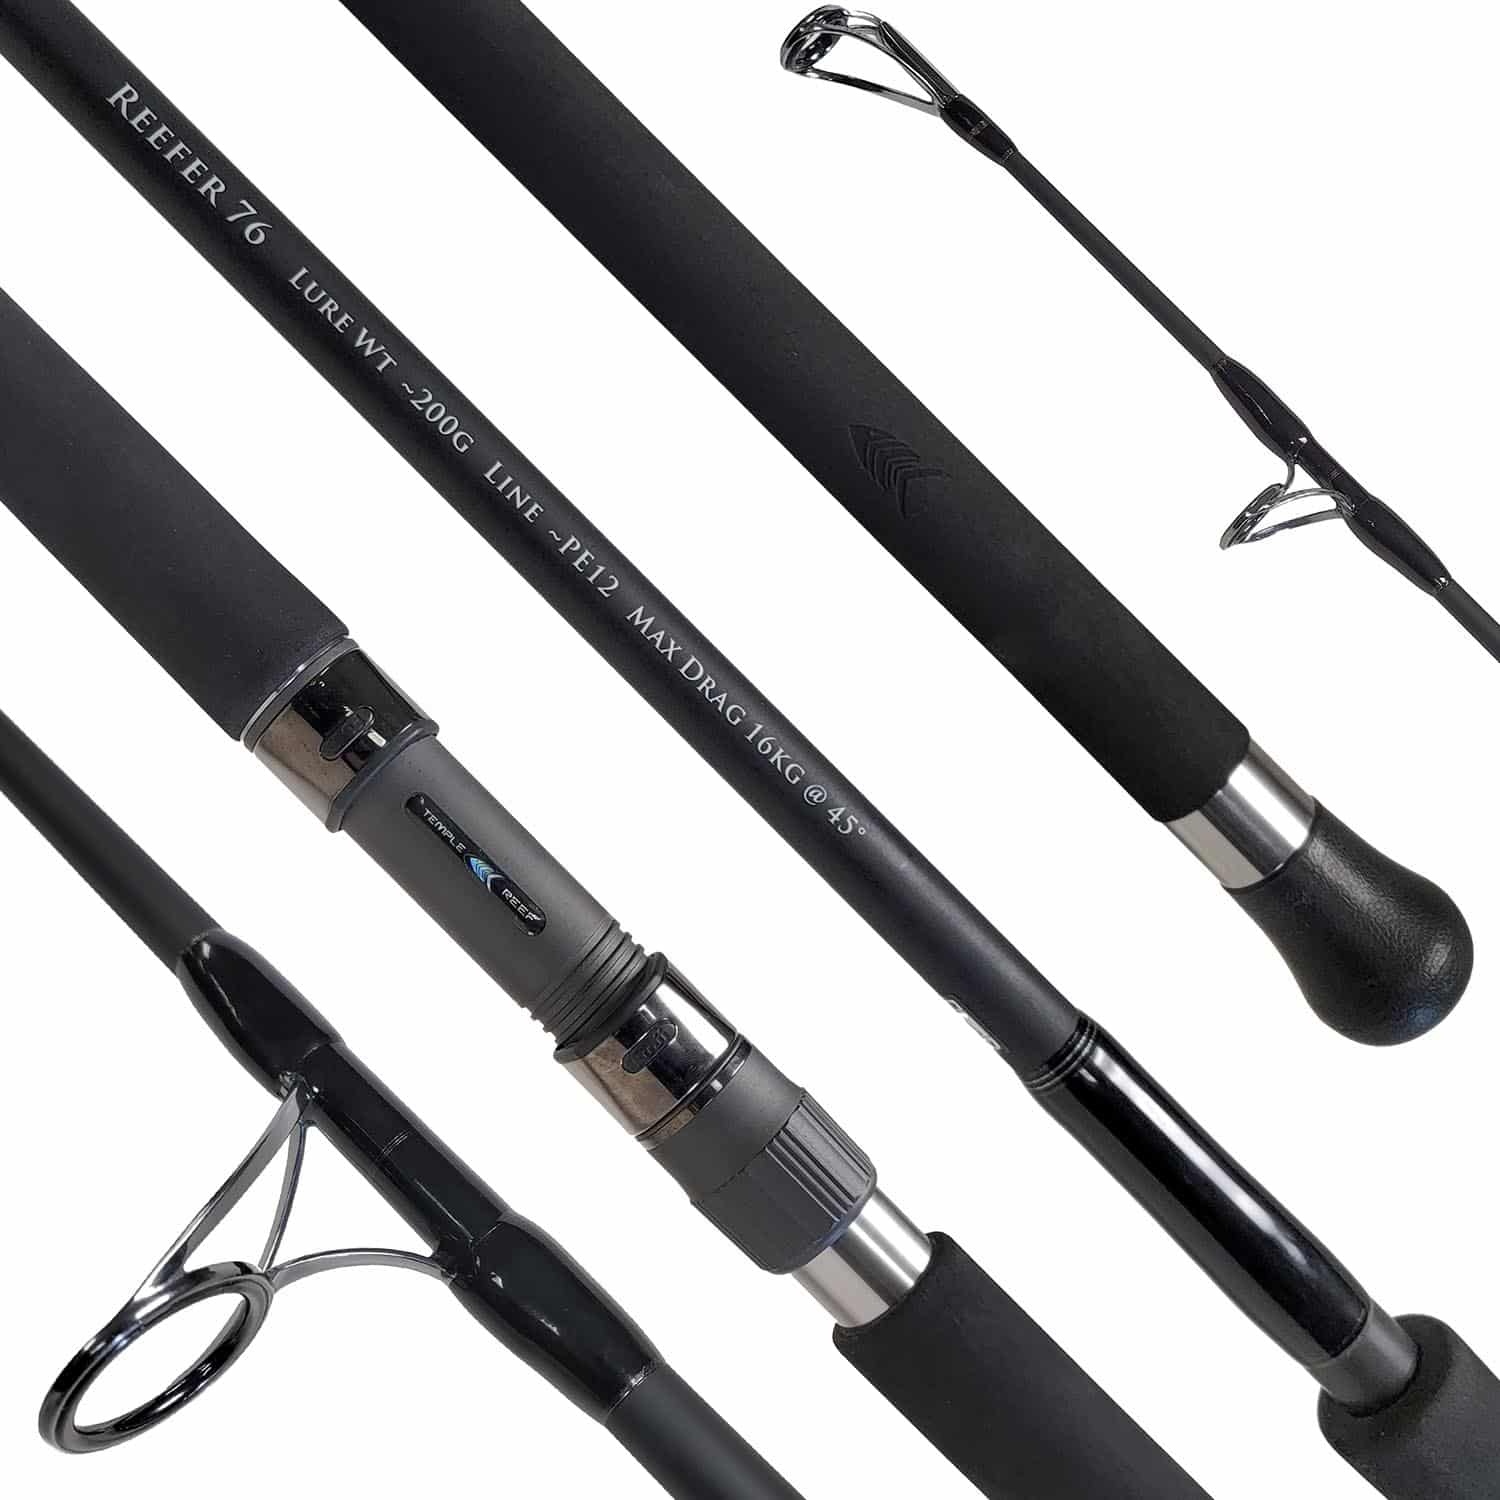 Basic Differences Between a Popping and Jigging Rod?